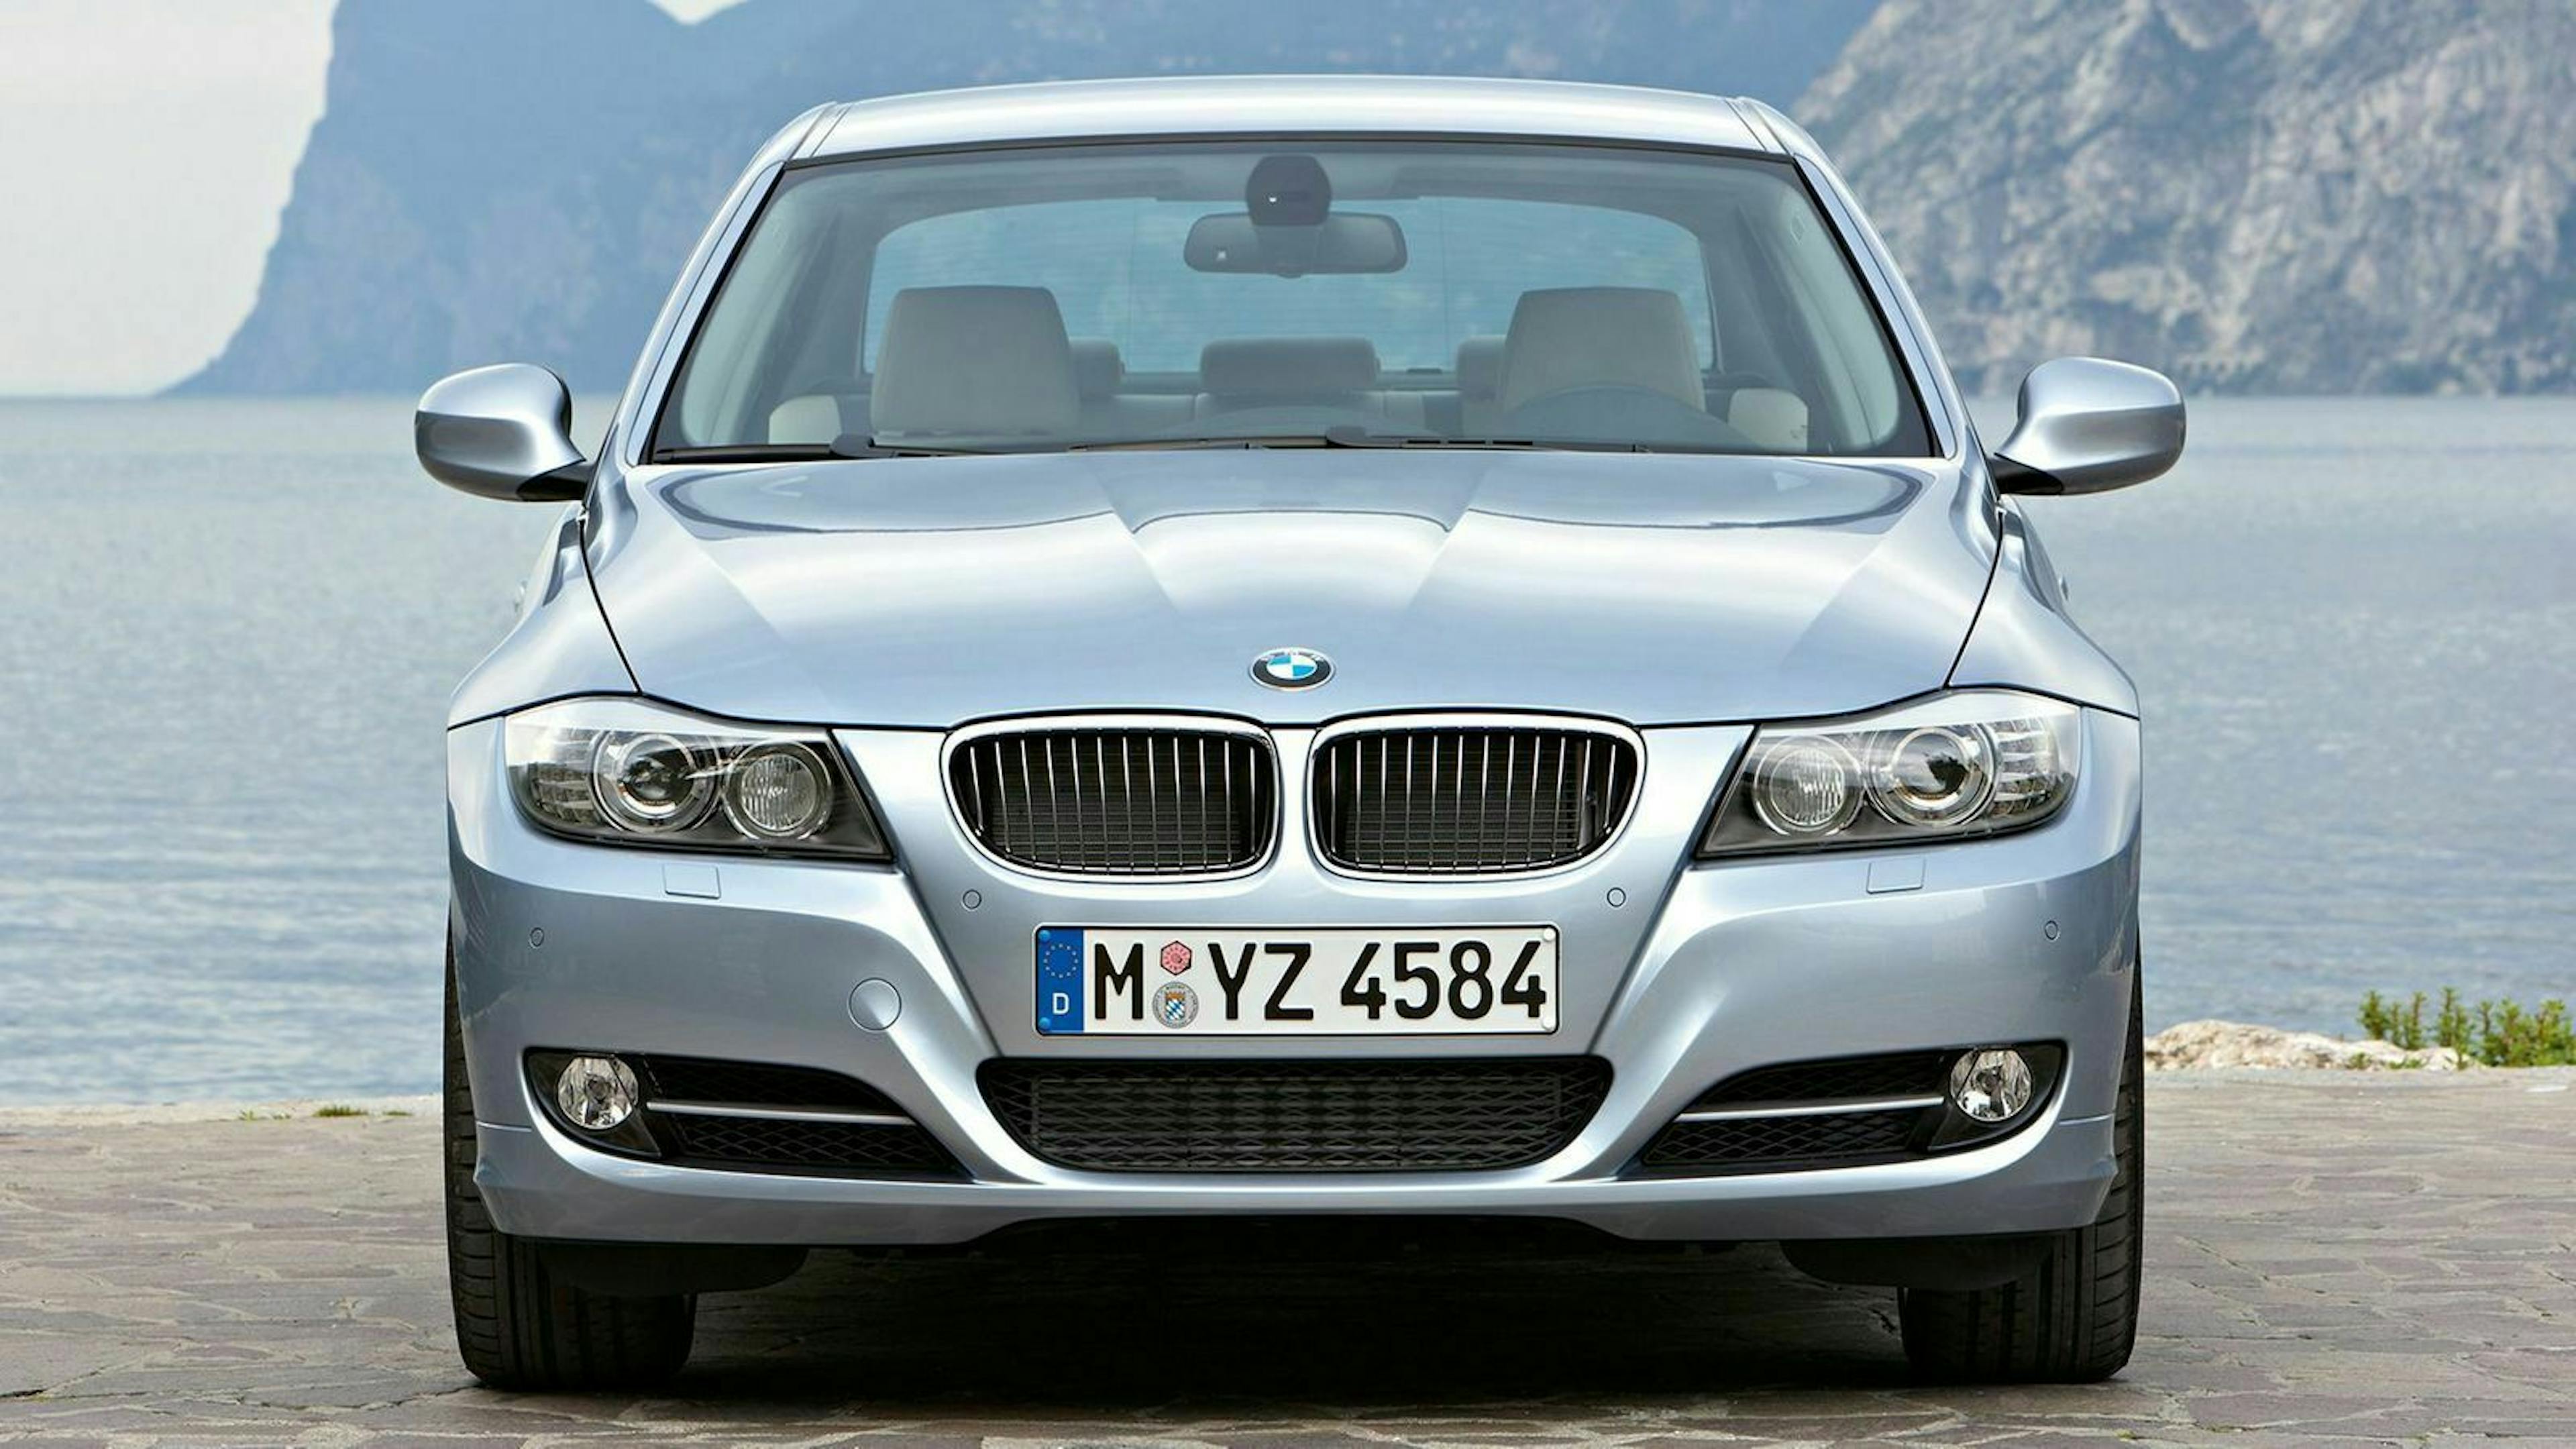 BMW E90 Facelift in Frontansicht